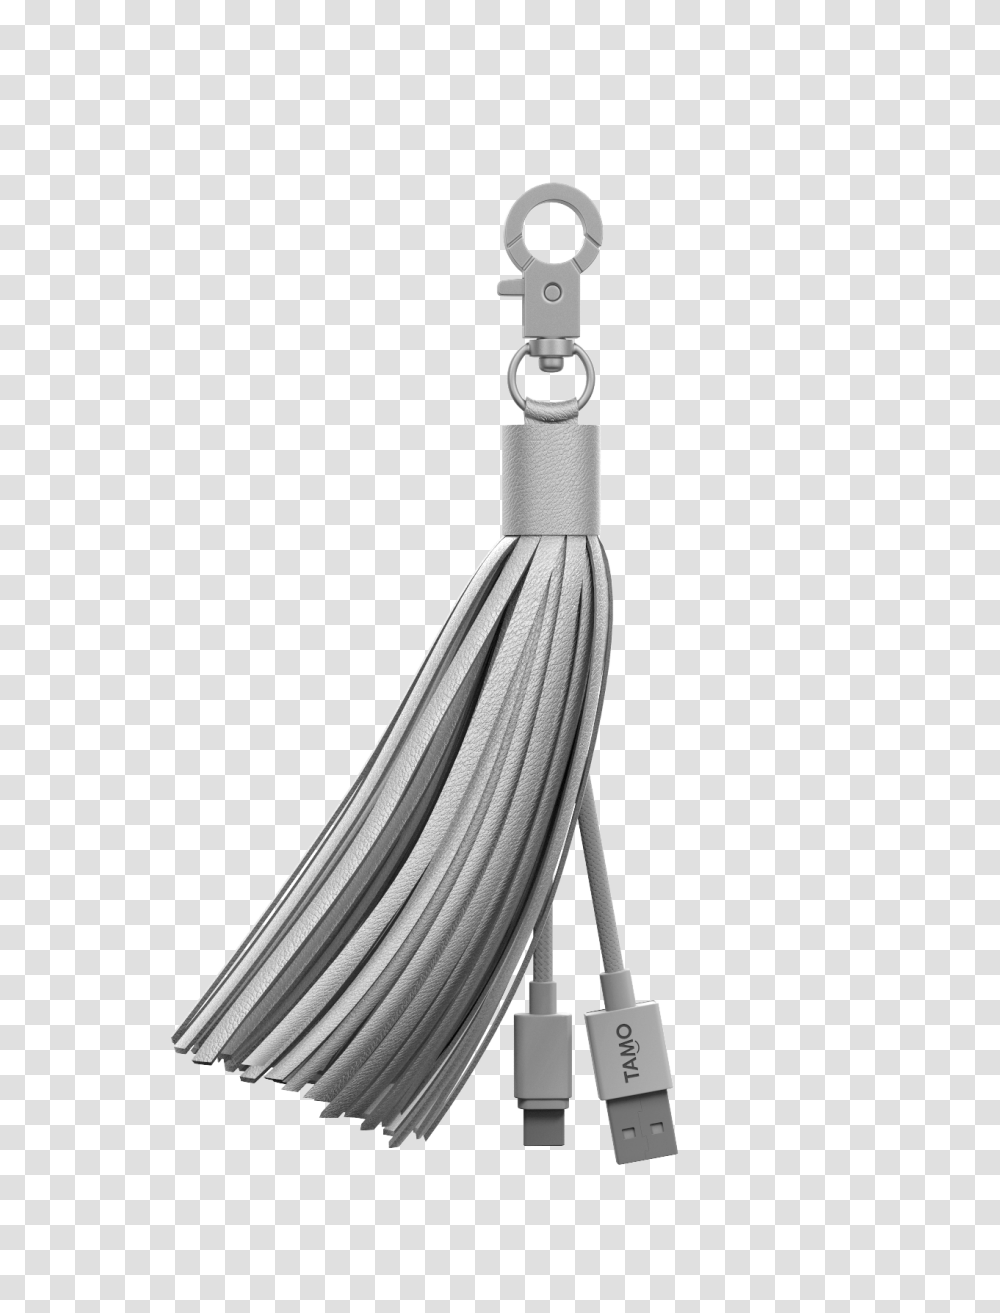 Tamo Tassel Chargers Leather Tassels With Charging Cables, Machine, Shower Faucet Transparent Png